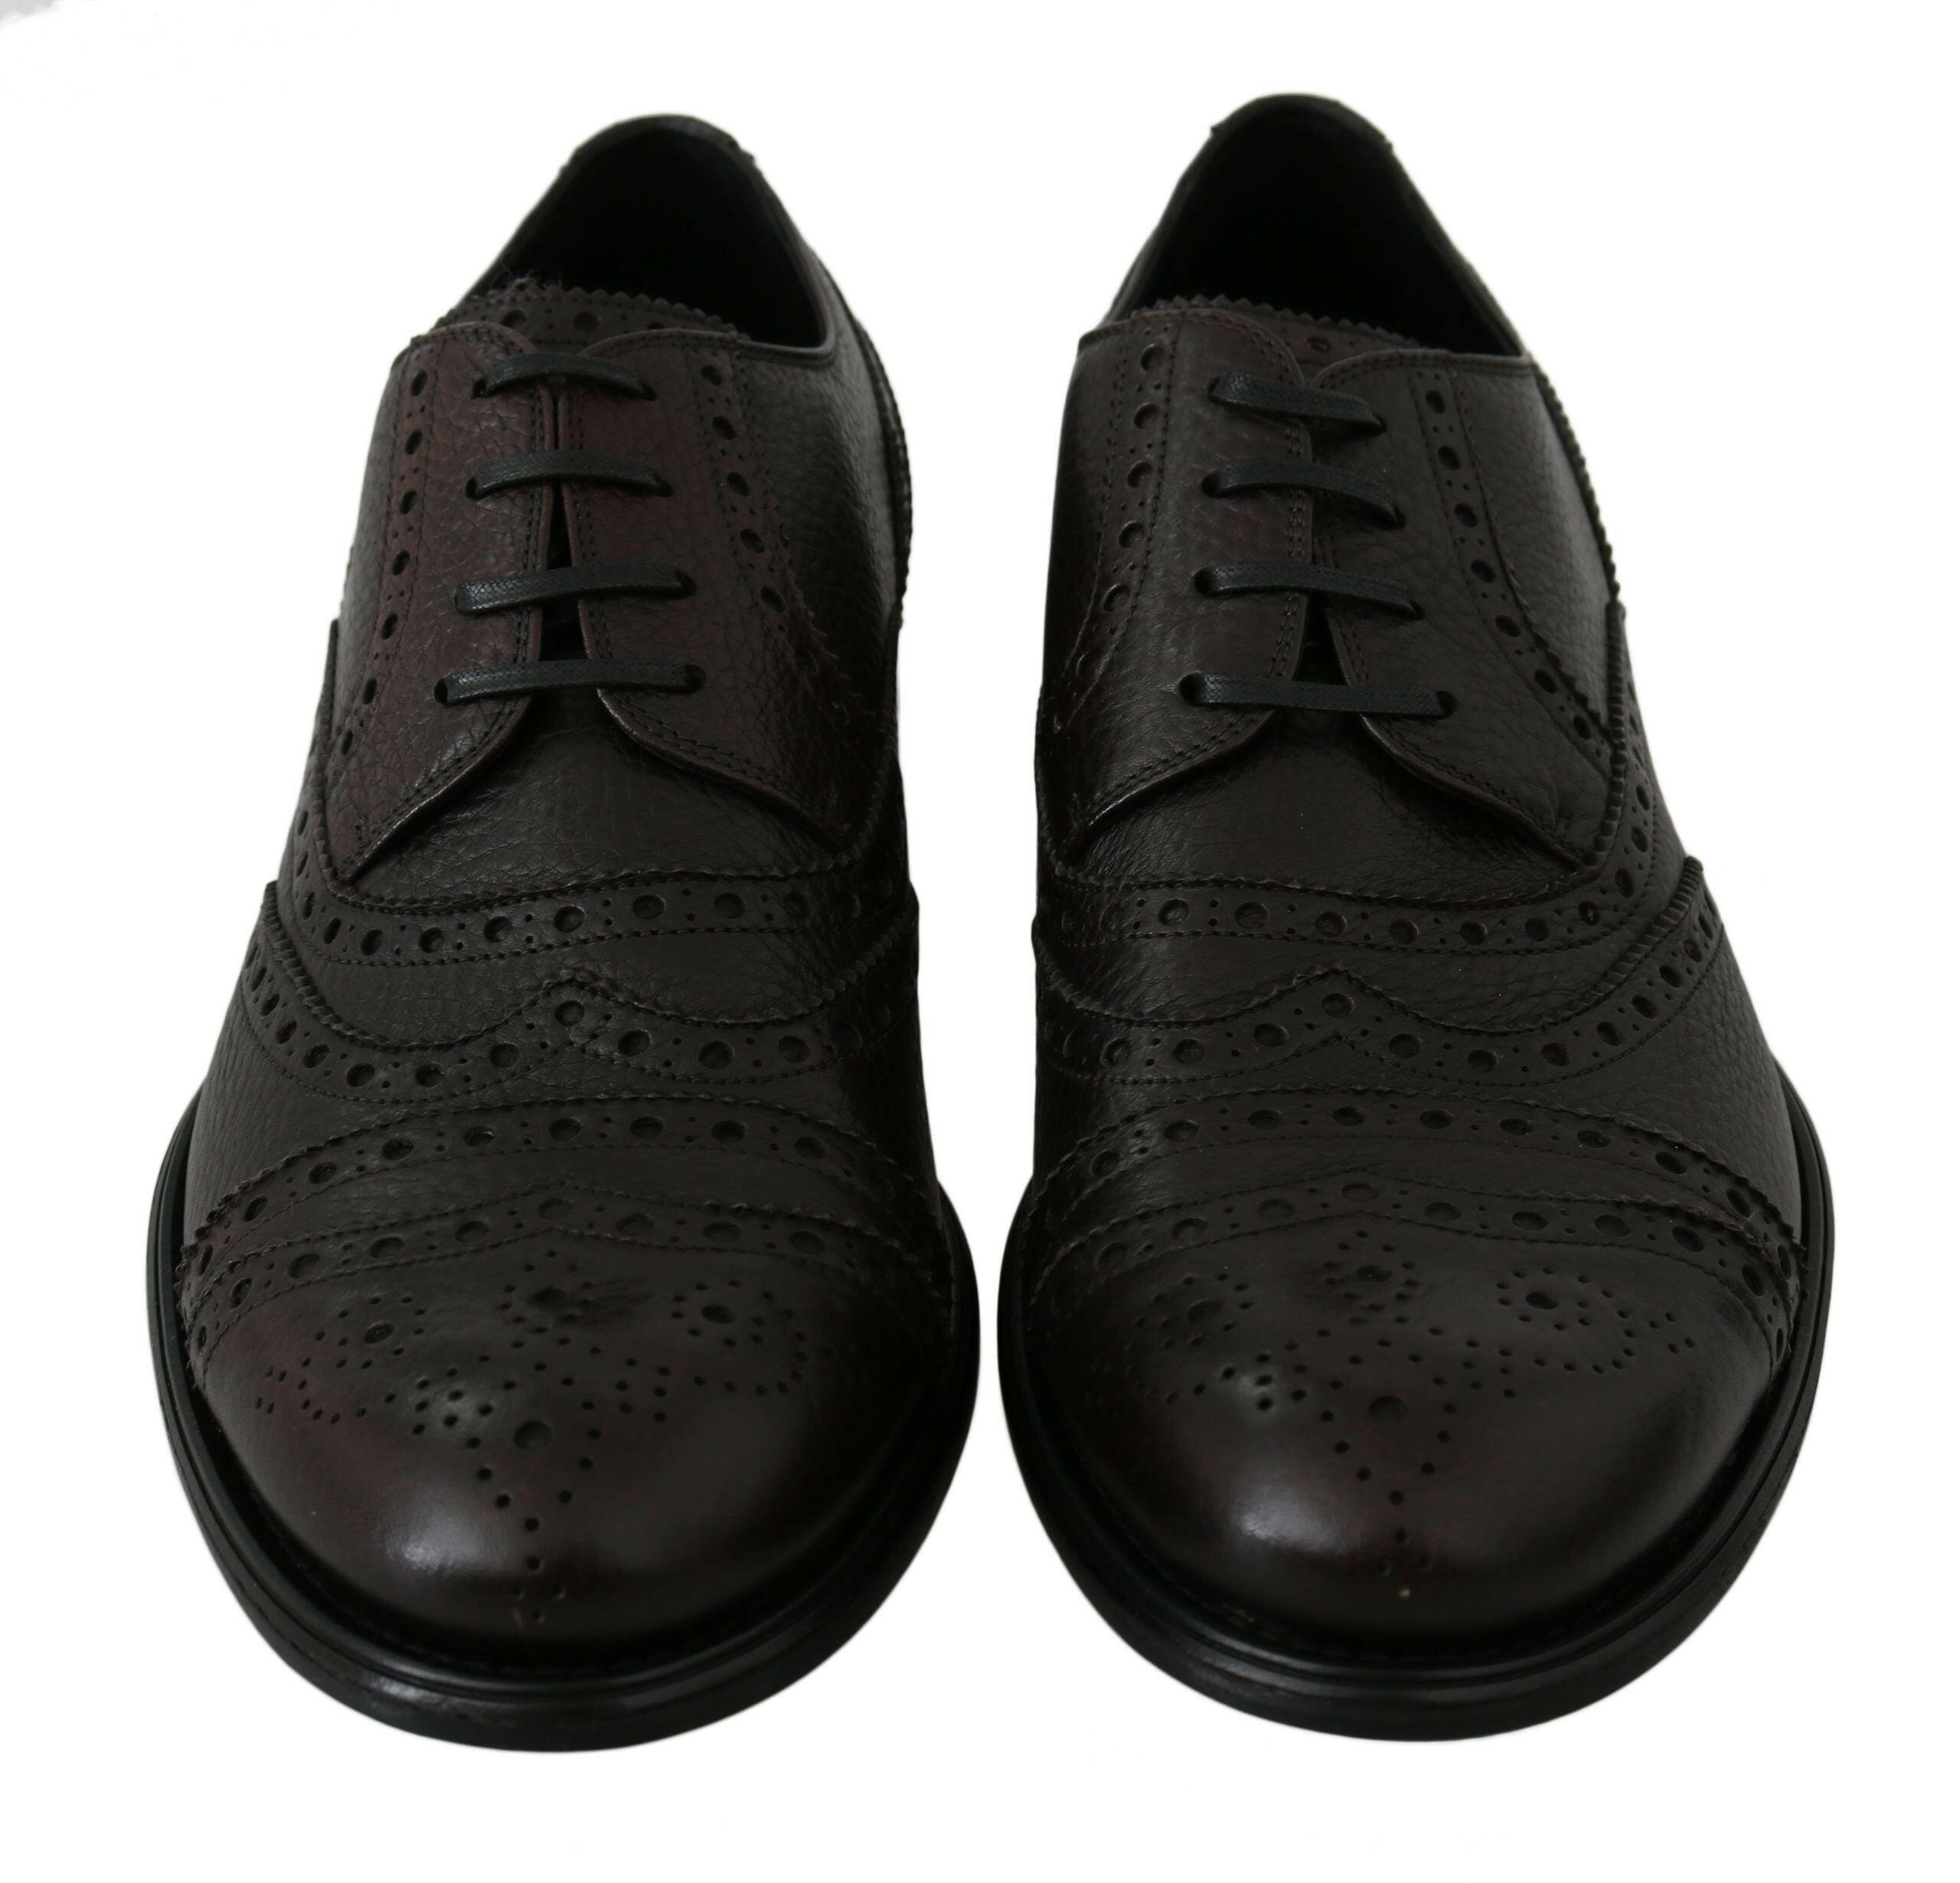 Dolce & Gabbana Brown Leather Brogue Derby Dress Shoes - GENUINE AUTHENTIC BRAND LLC  